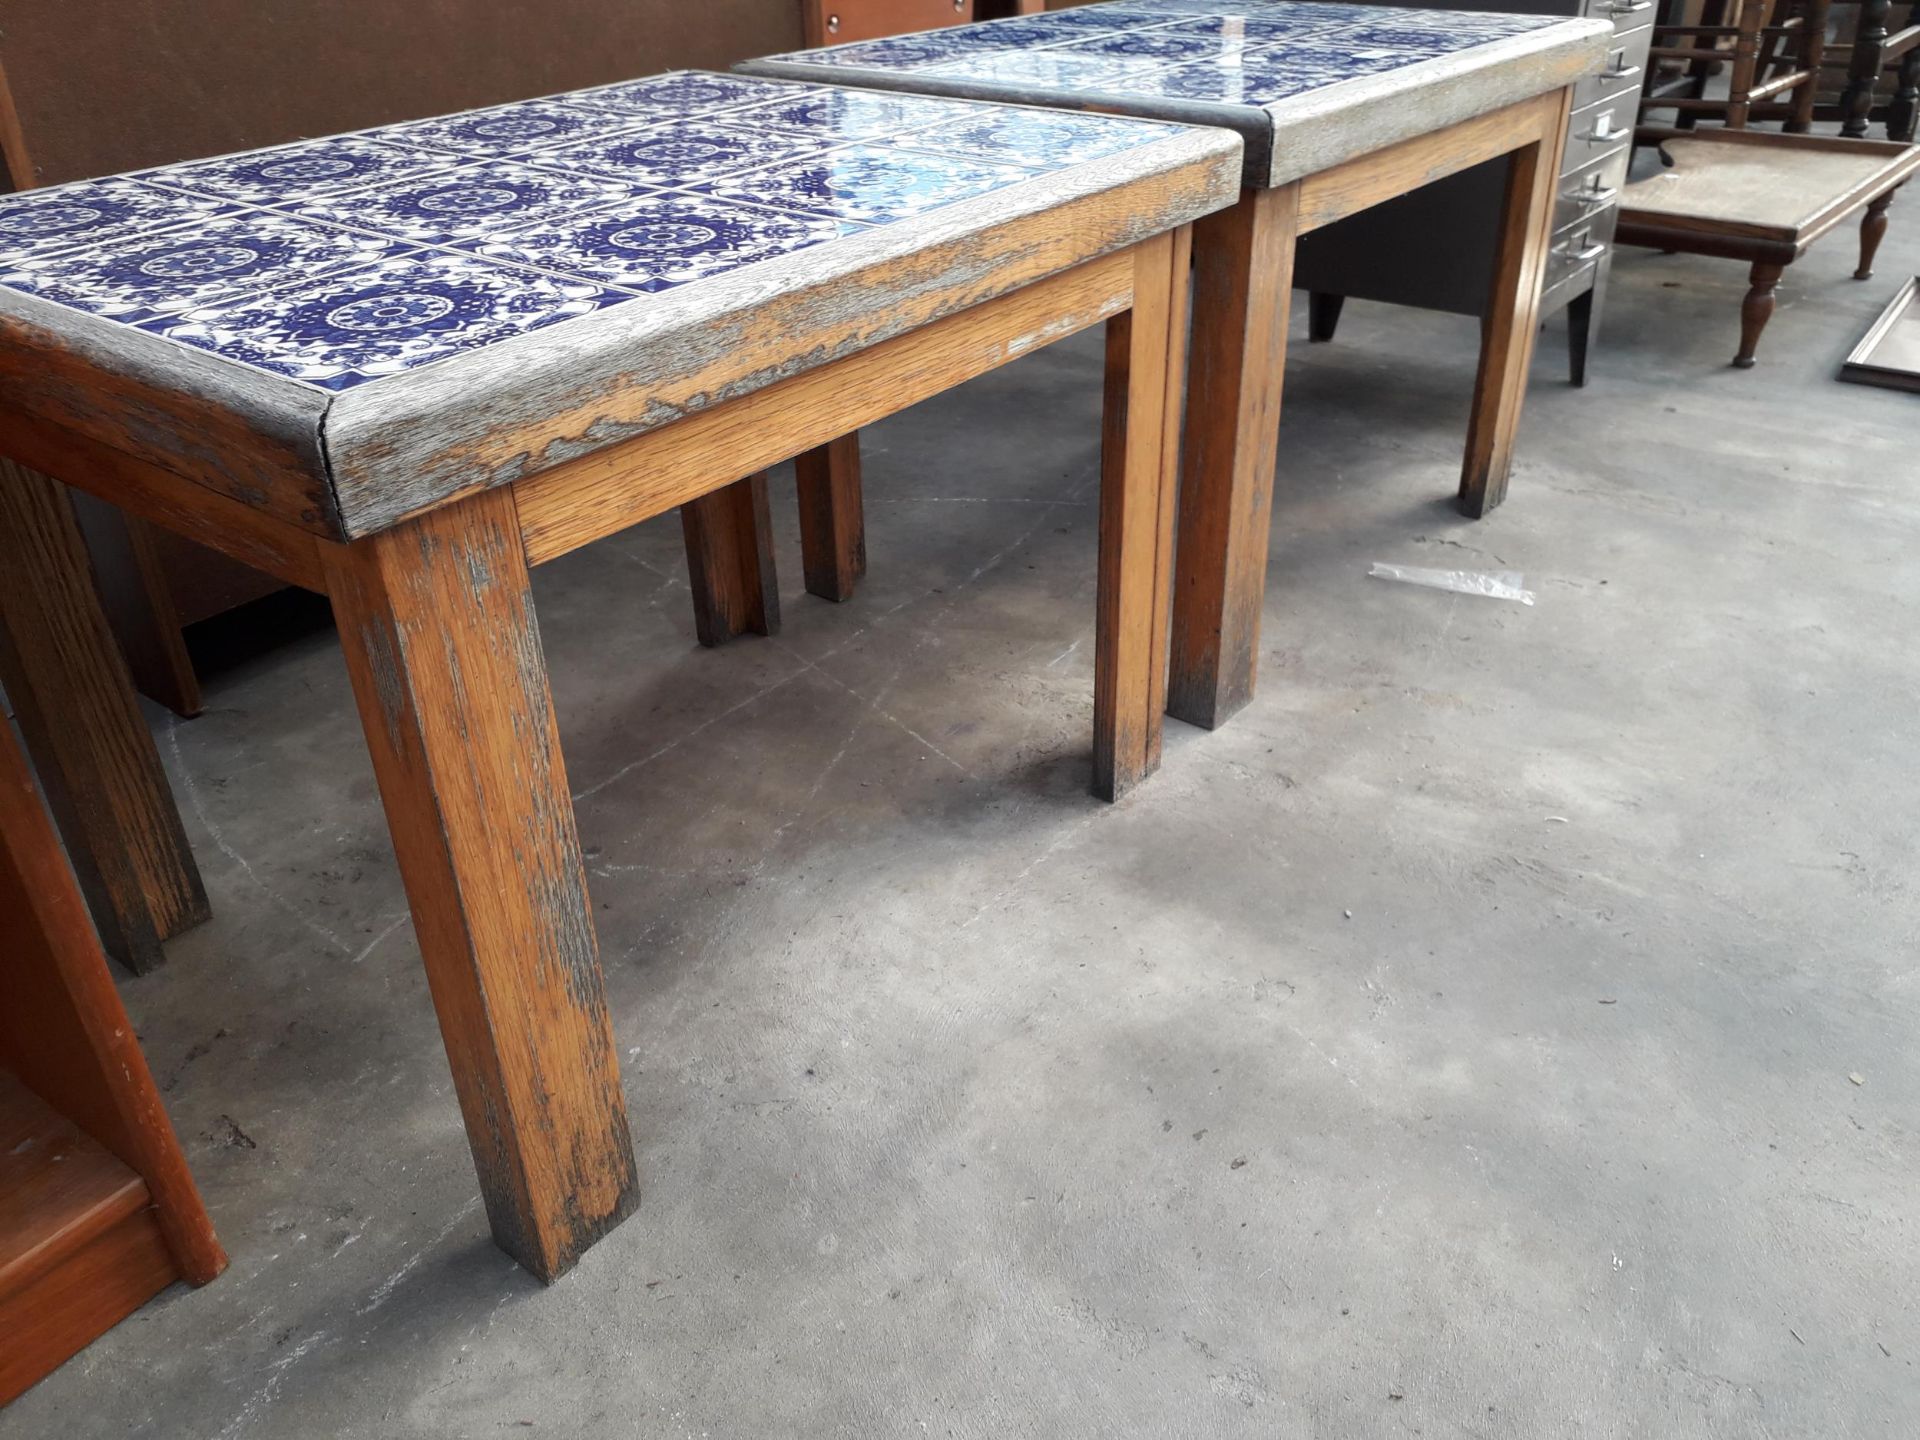 A PAIR OF MODERN COFFEE TABLES WITH BLUE AND WHITE TILED TOPS, 26 X 20" EACH - Image 2 of 2